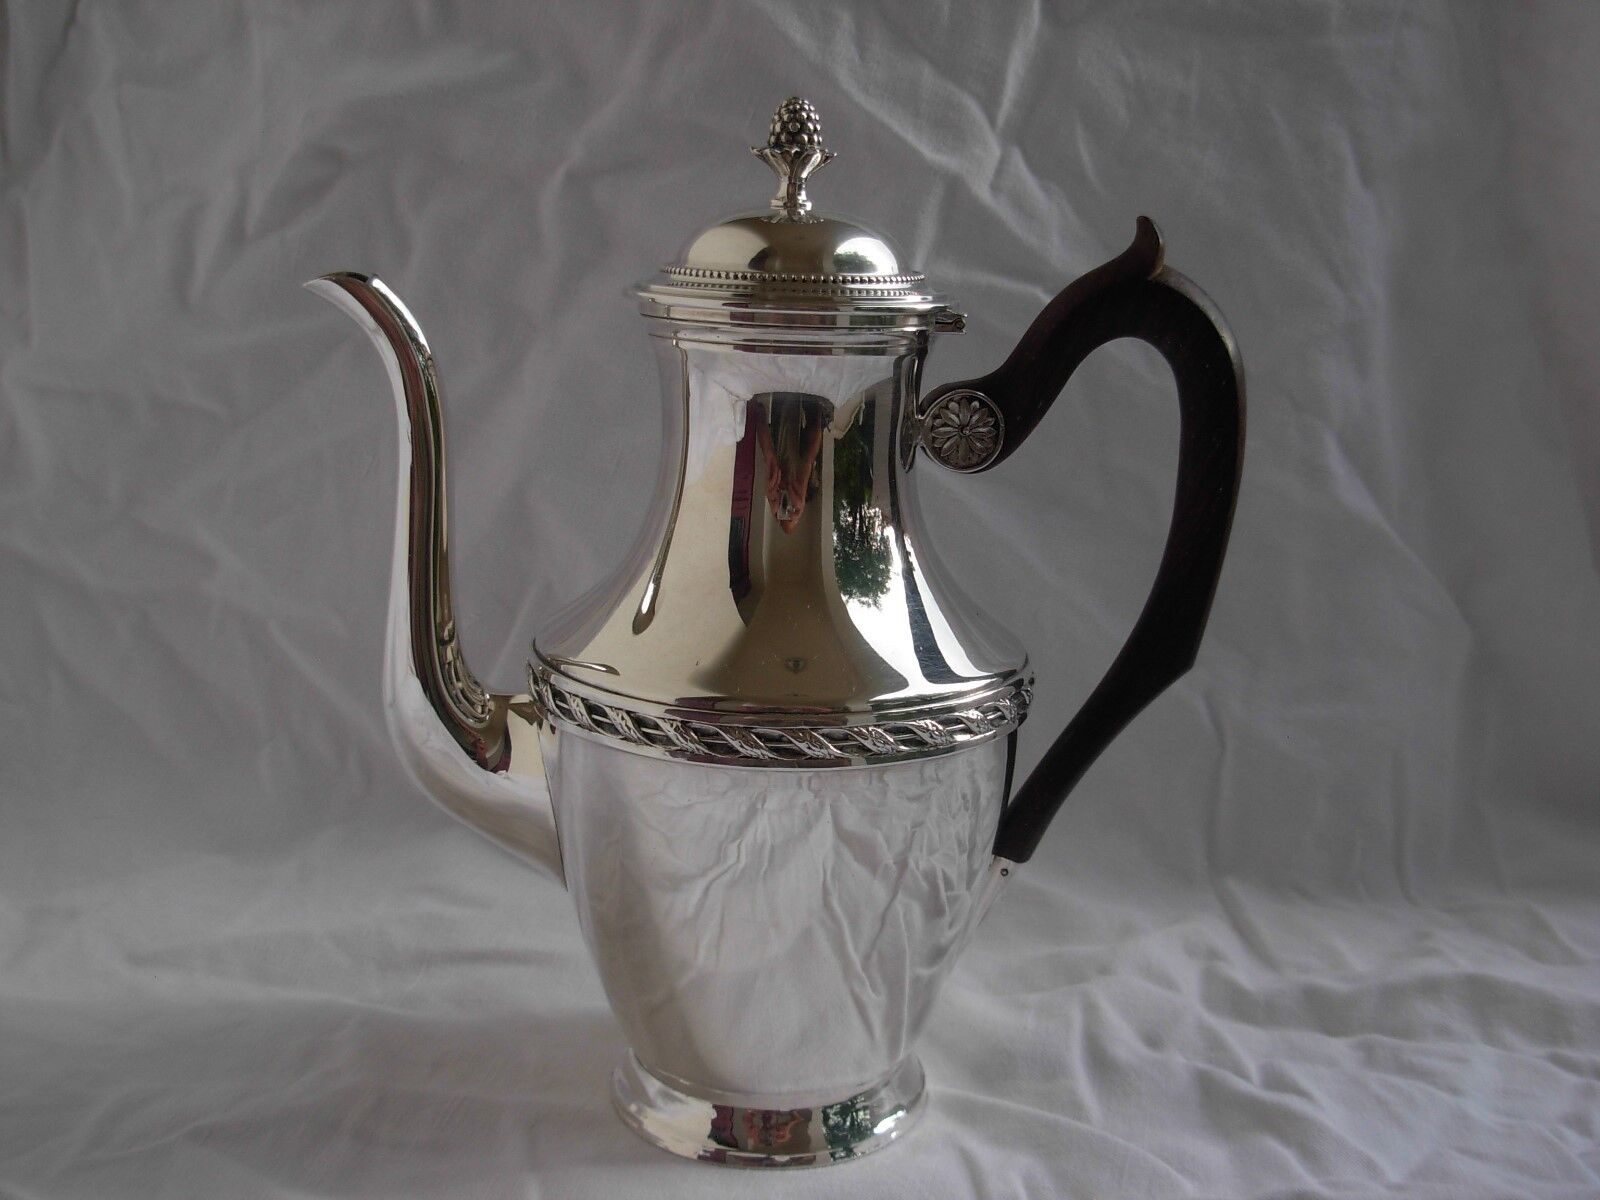 ANTIQUE FRENCH STERLING SILVER COFFEE,TEA POT,LOUIS XVI STYLE,EARLY 20th CENTURY